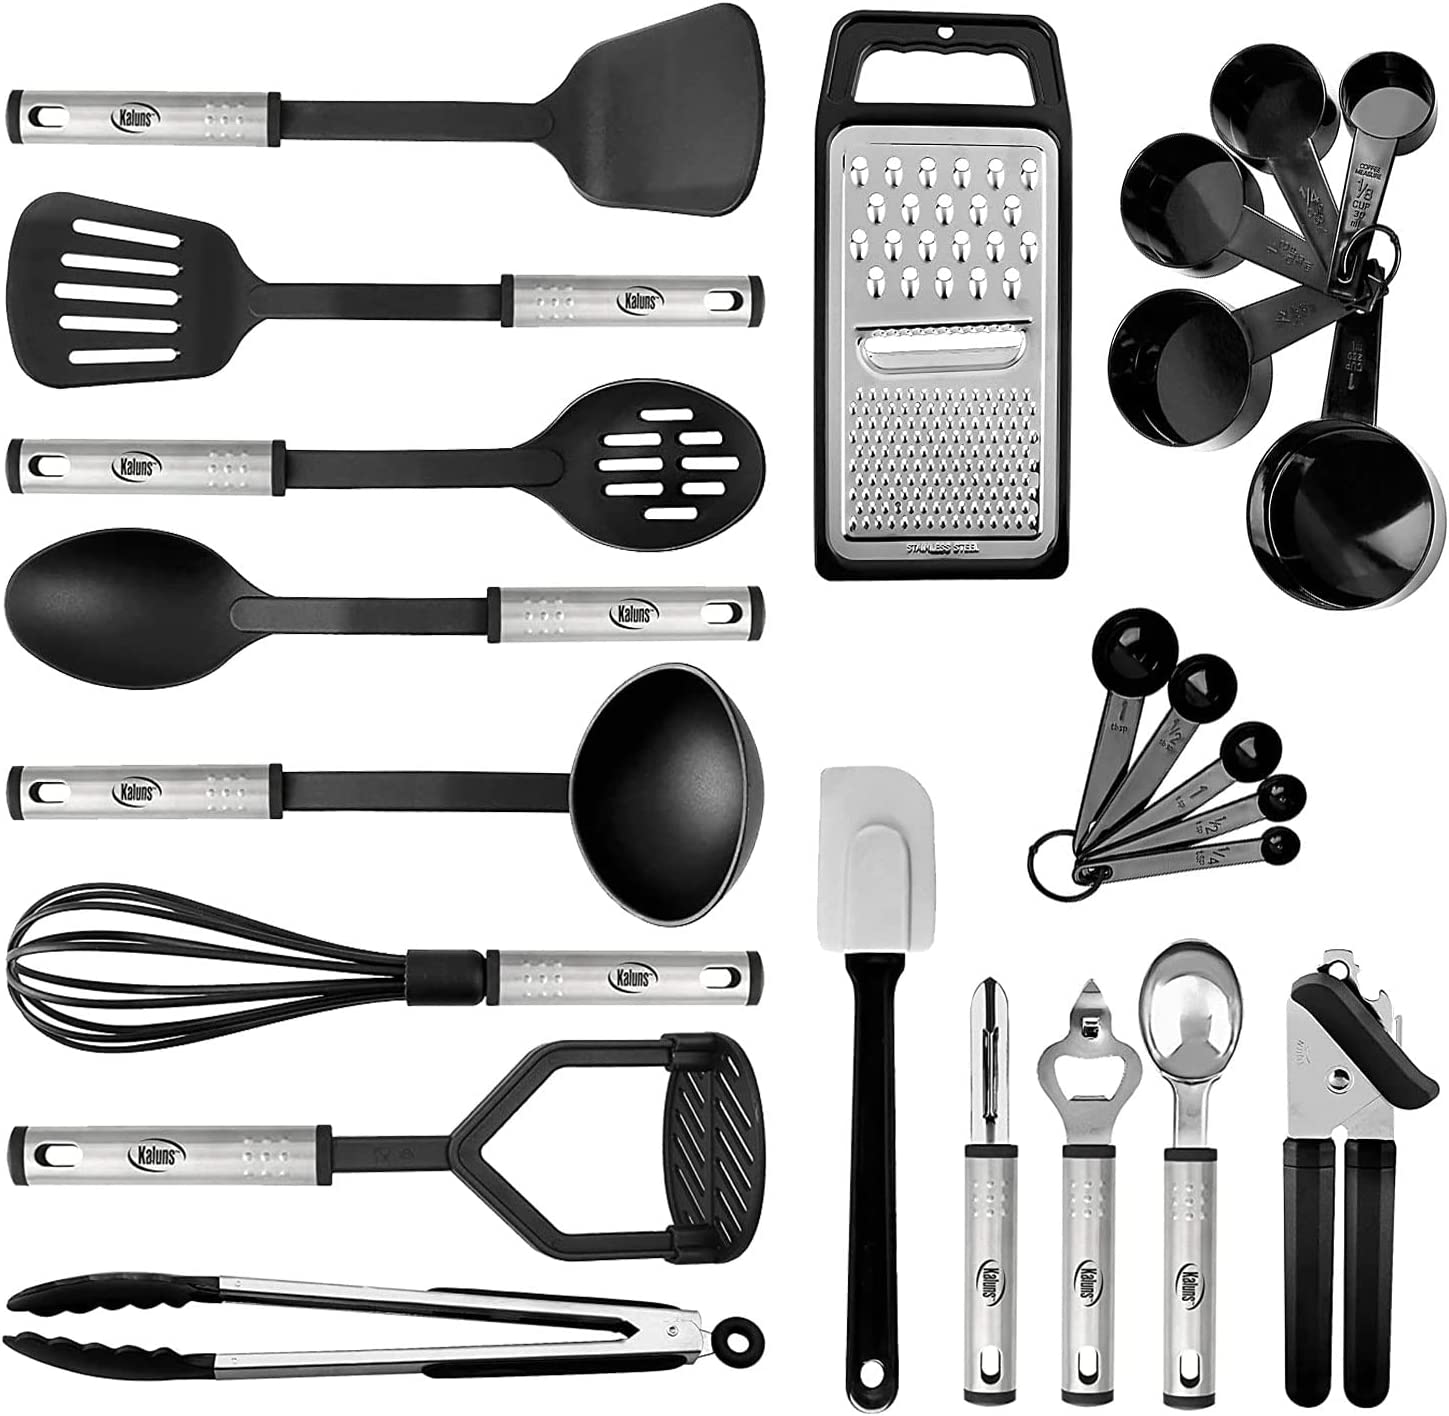 23Pcs Kitchen Utensil Sets Silicone Cooking Set Nonstick Cooking Supplies  Kitchen Accessories Gadget Tools Stainless Steel Non-Stick Heat Resistant  Cookware set Useful Pots and Pans Accessories 